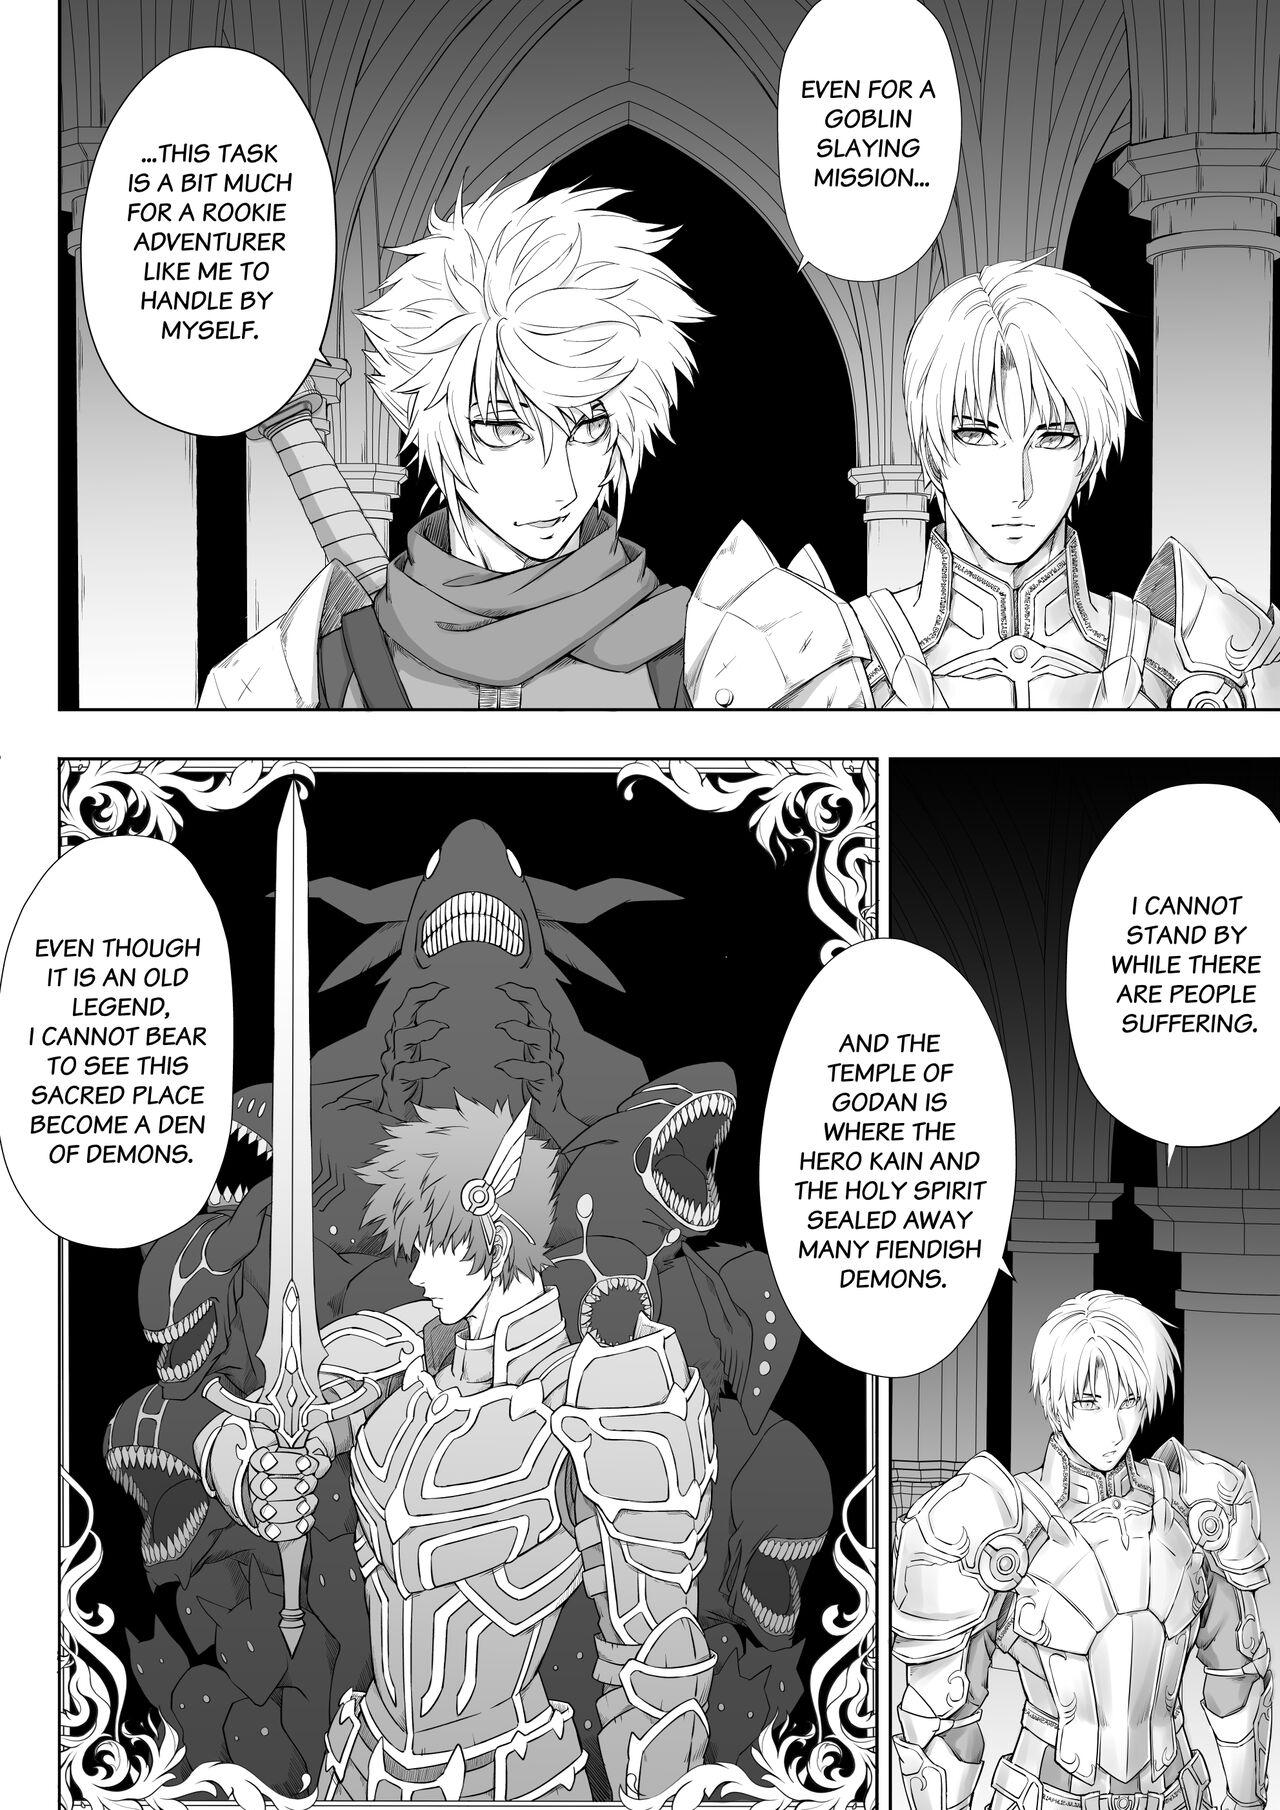 Assfingering Knight of the Labyrinth - Original Hiddencam - Page 4